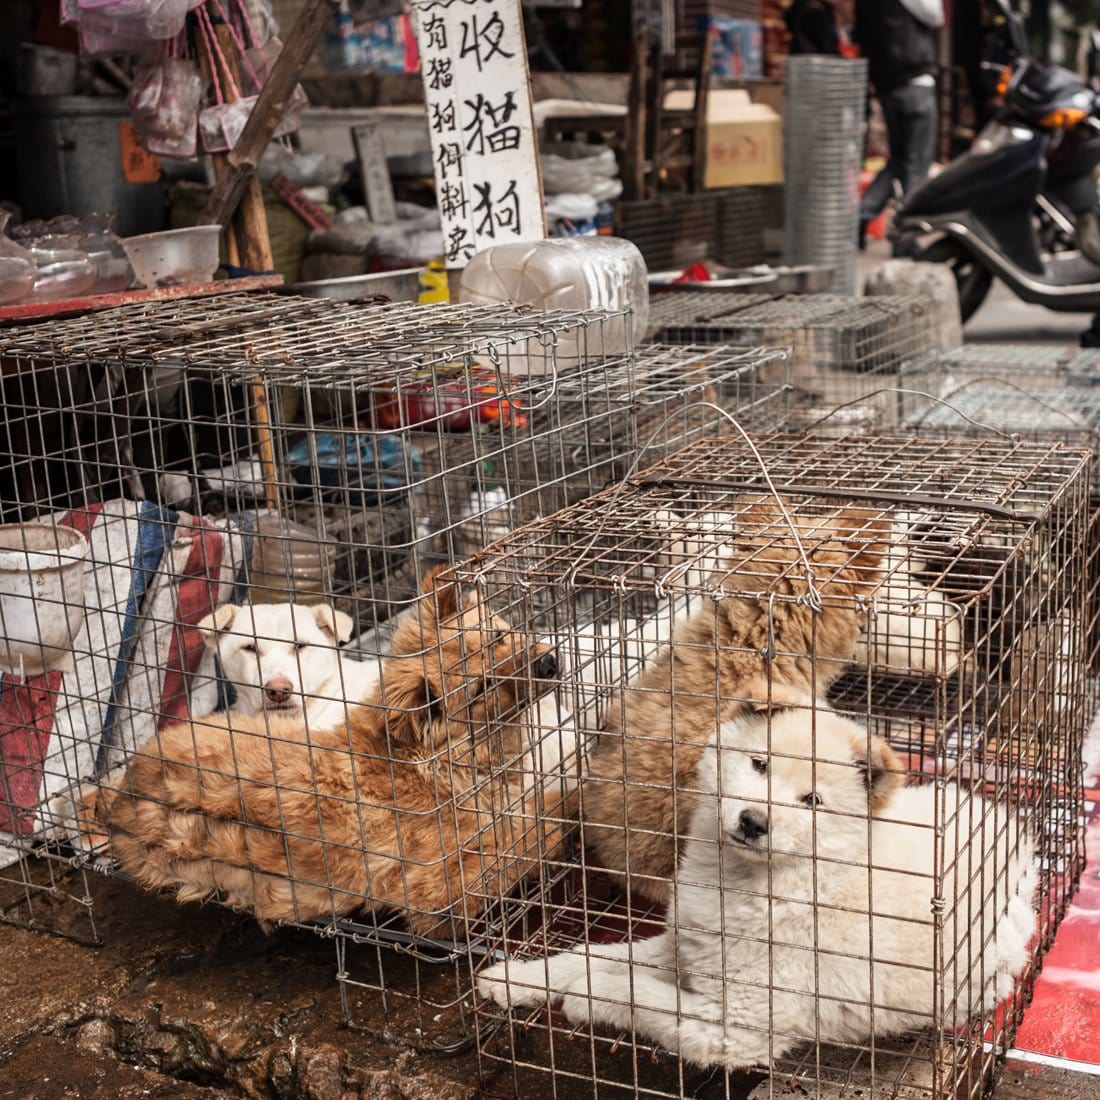 dog Meat market china dogs in cages